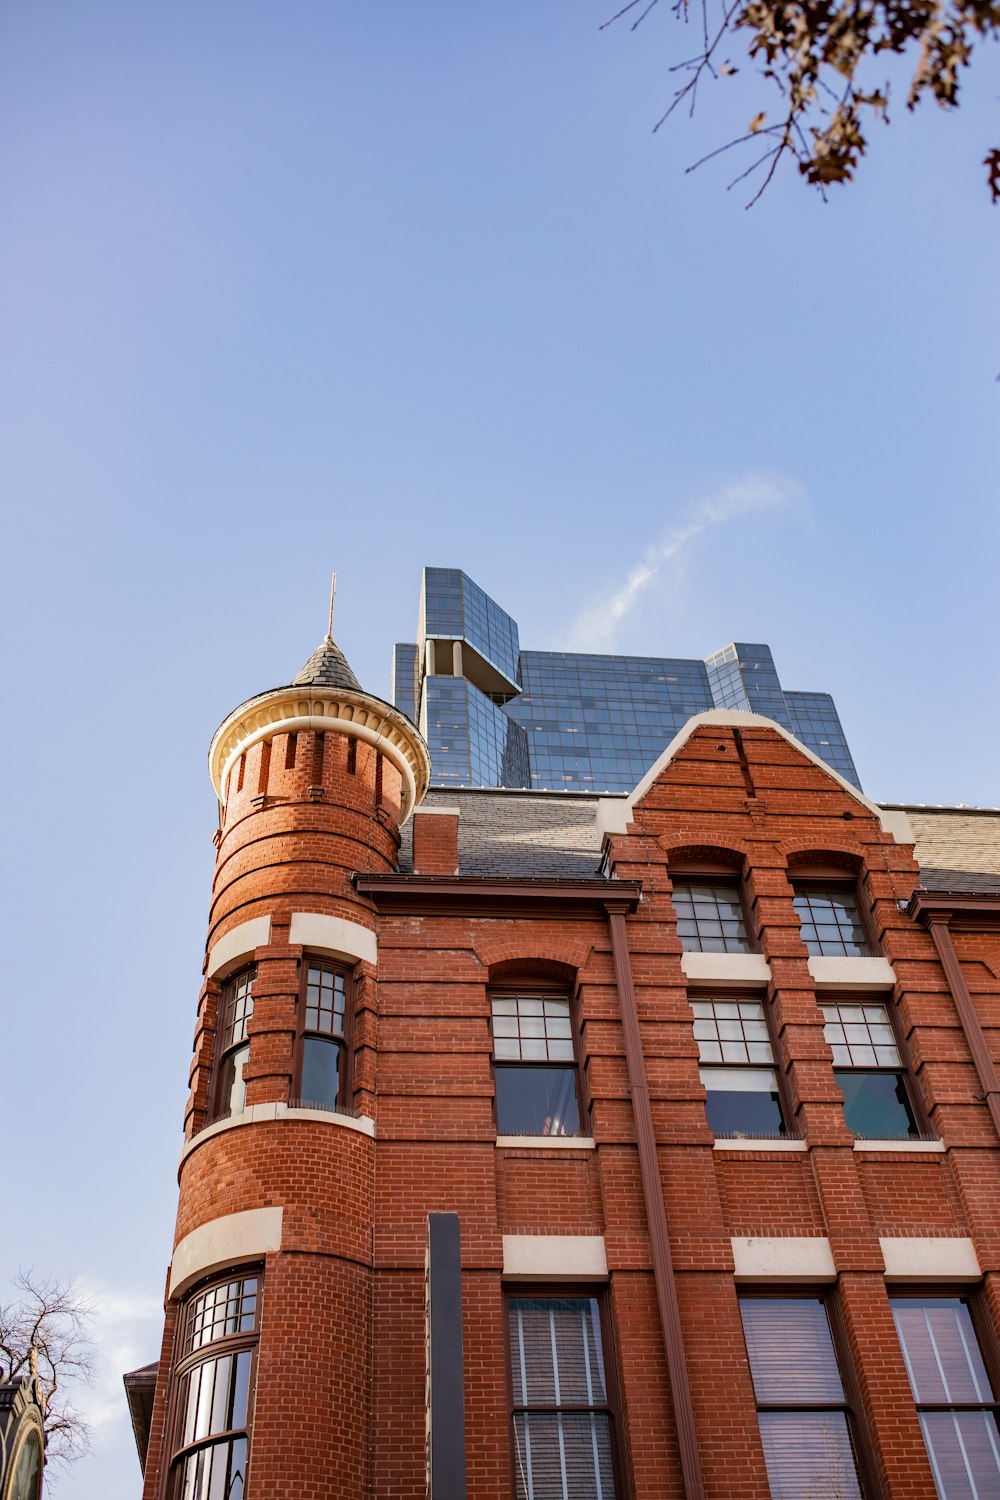 a tall red brick building with a clock tower